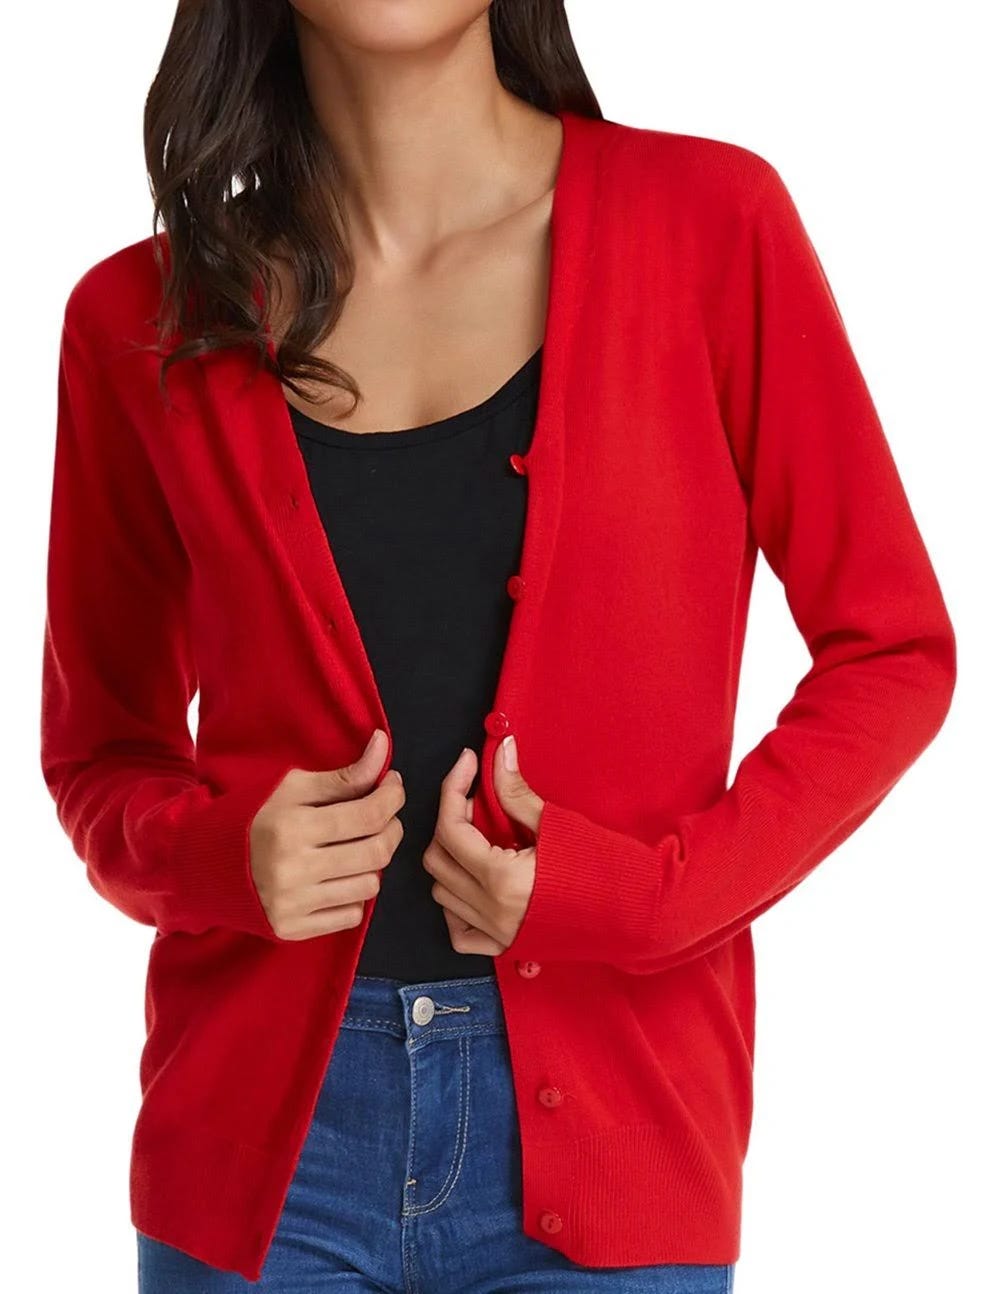 Chic, Lightweight Red V-Neck Cardigan for Women | Image